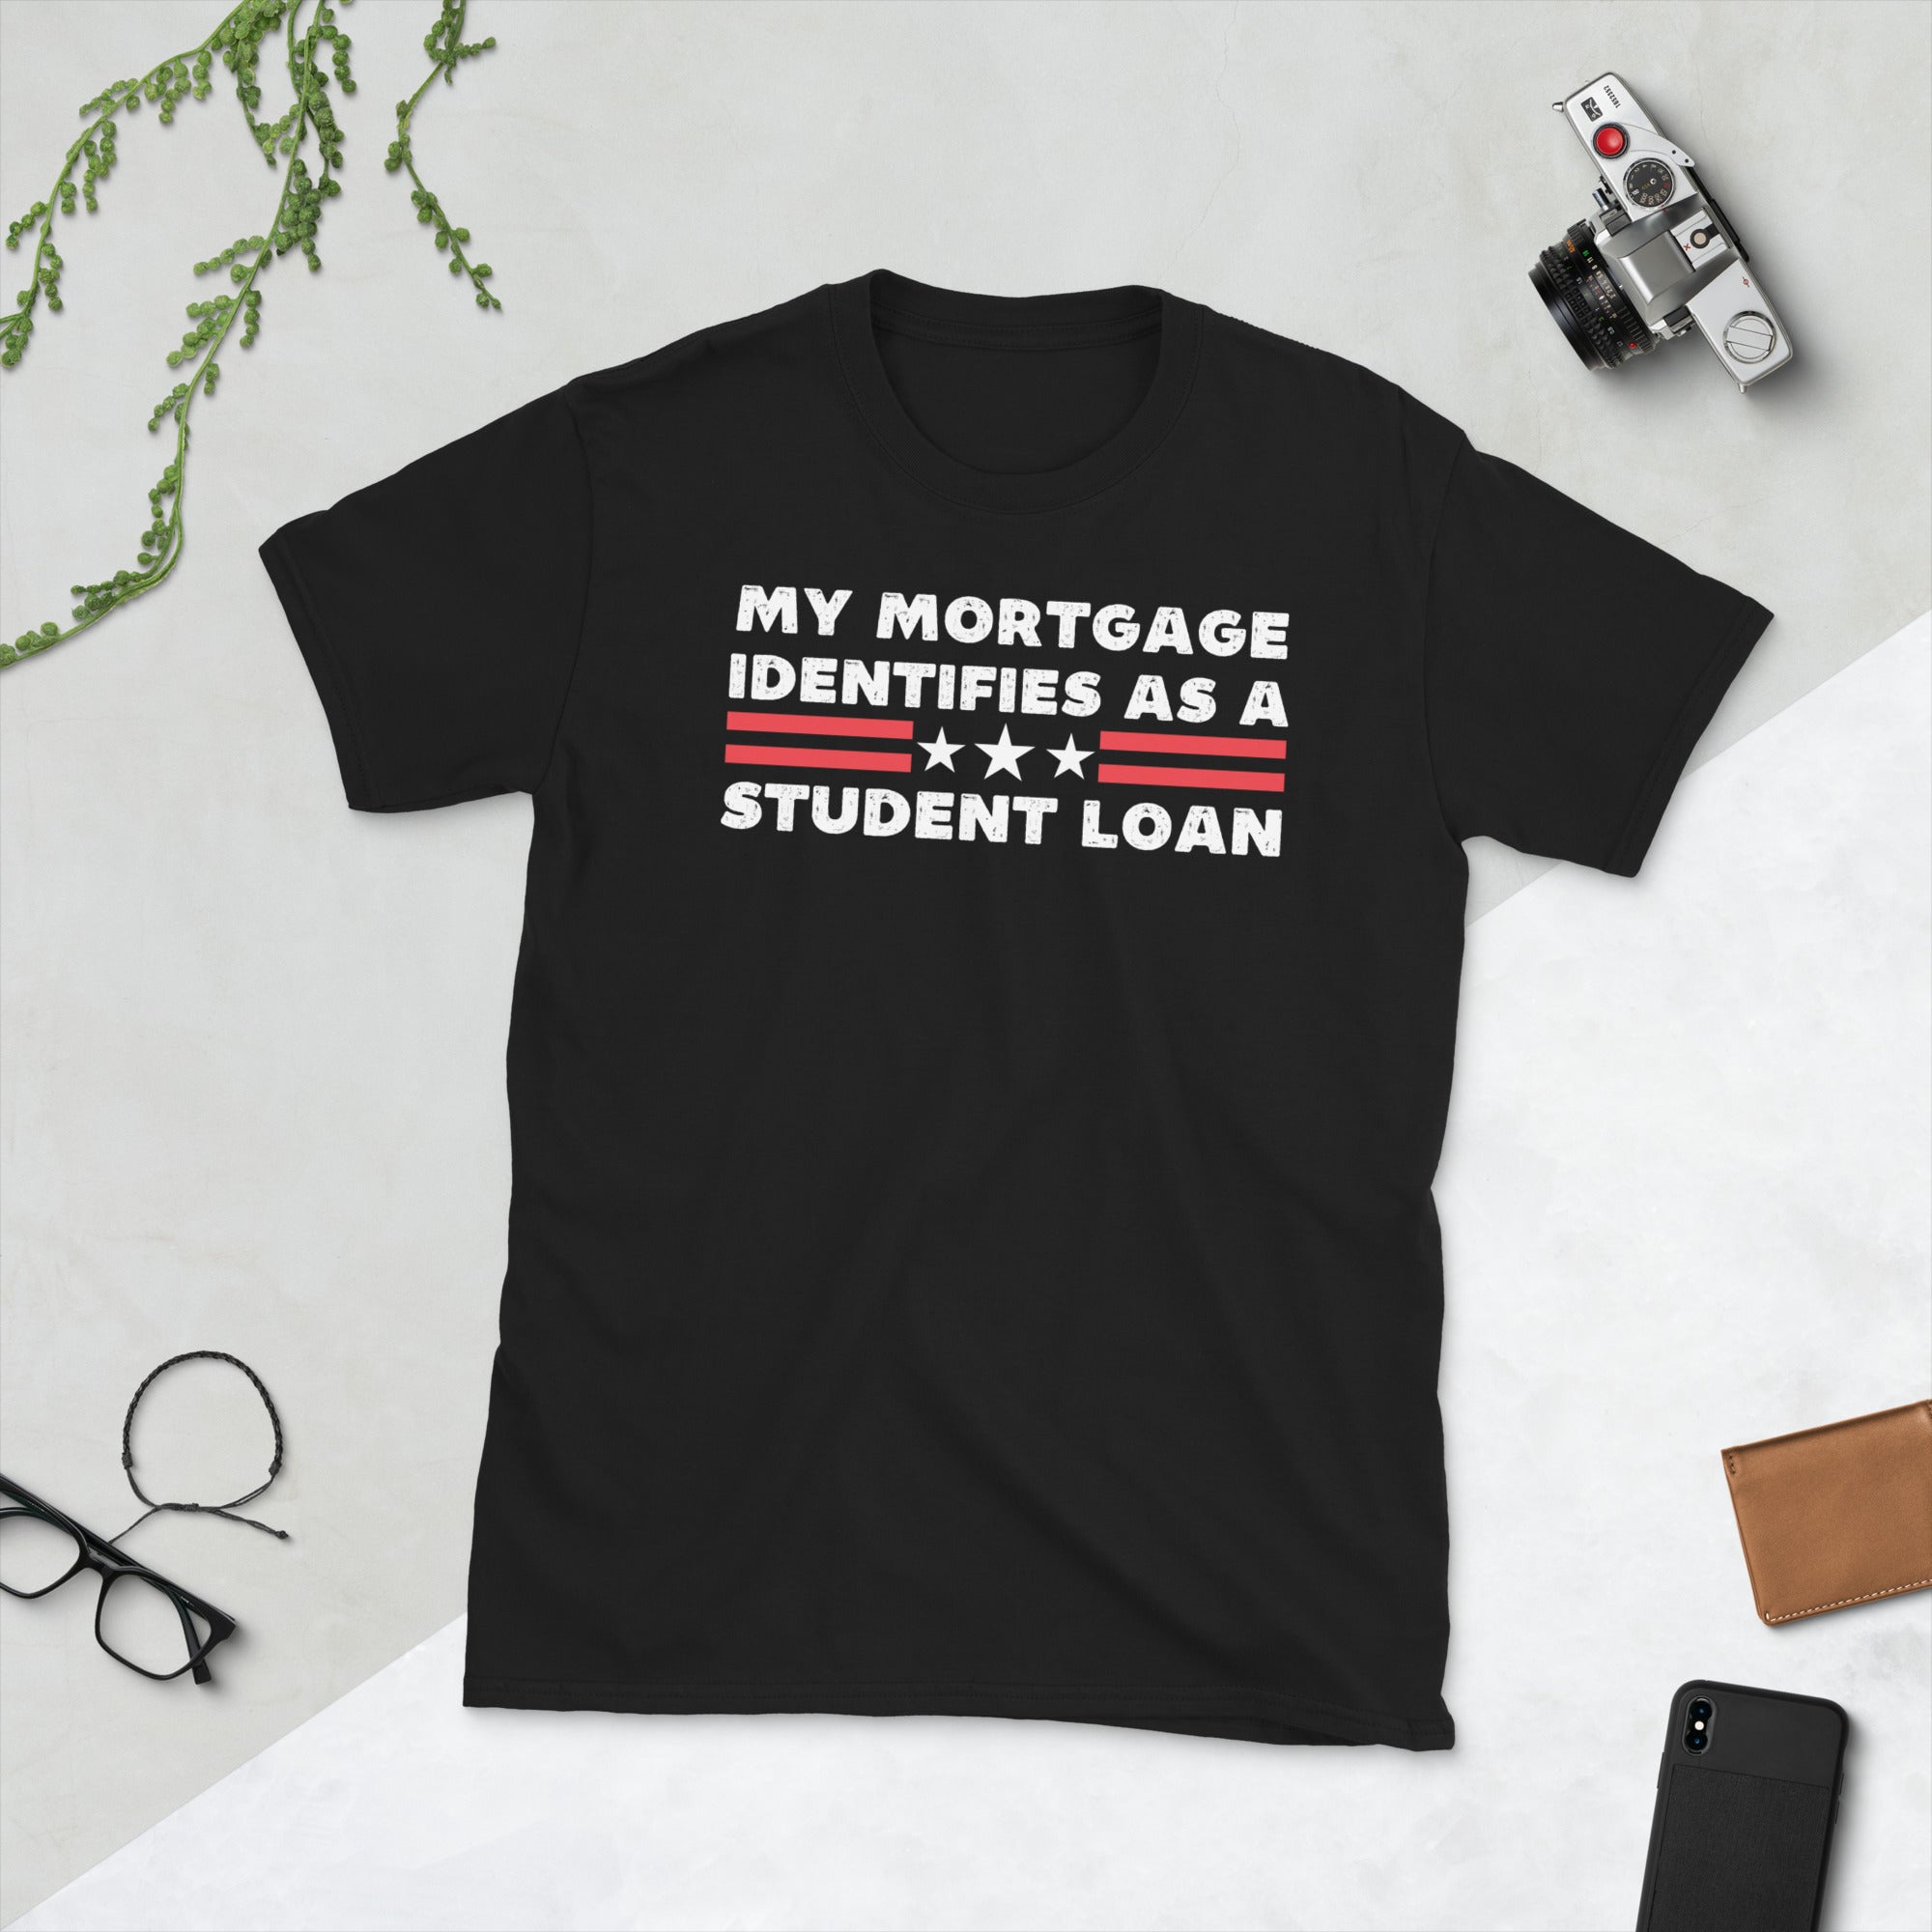 My Mortgage Identifies As A Student Loan, Funny Republican Shirt, Student Loan Forgiveness, FJB Shirt, American Patriot, College Students